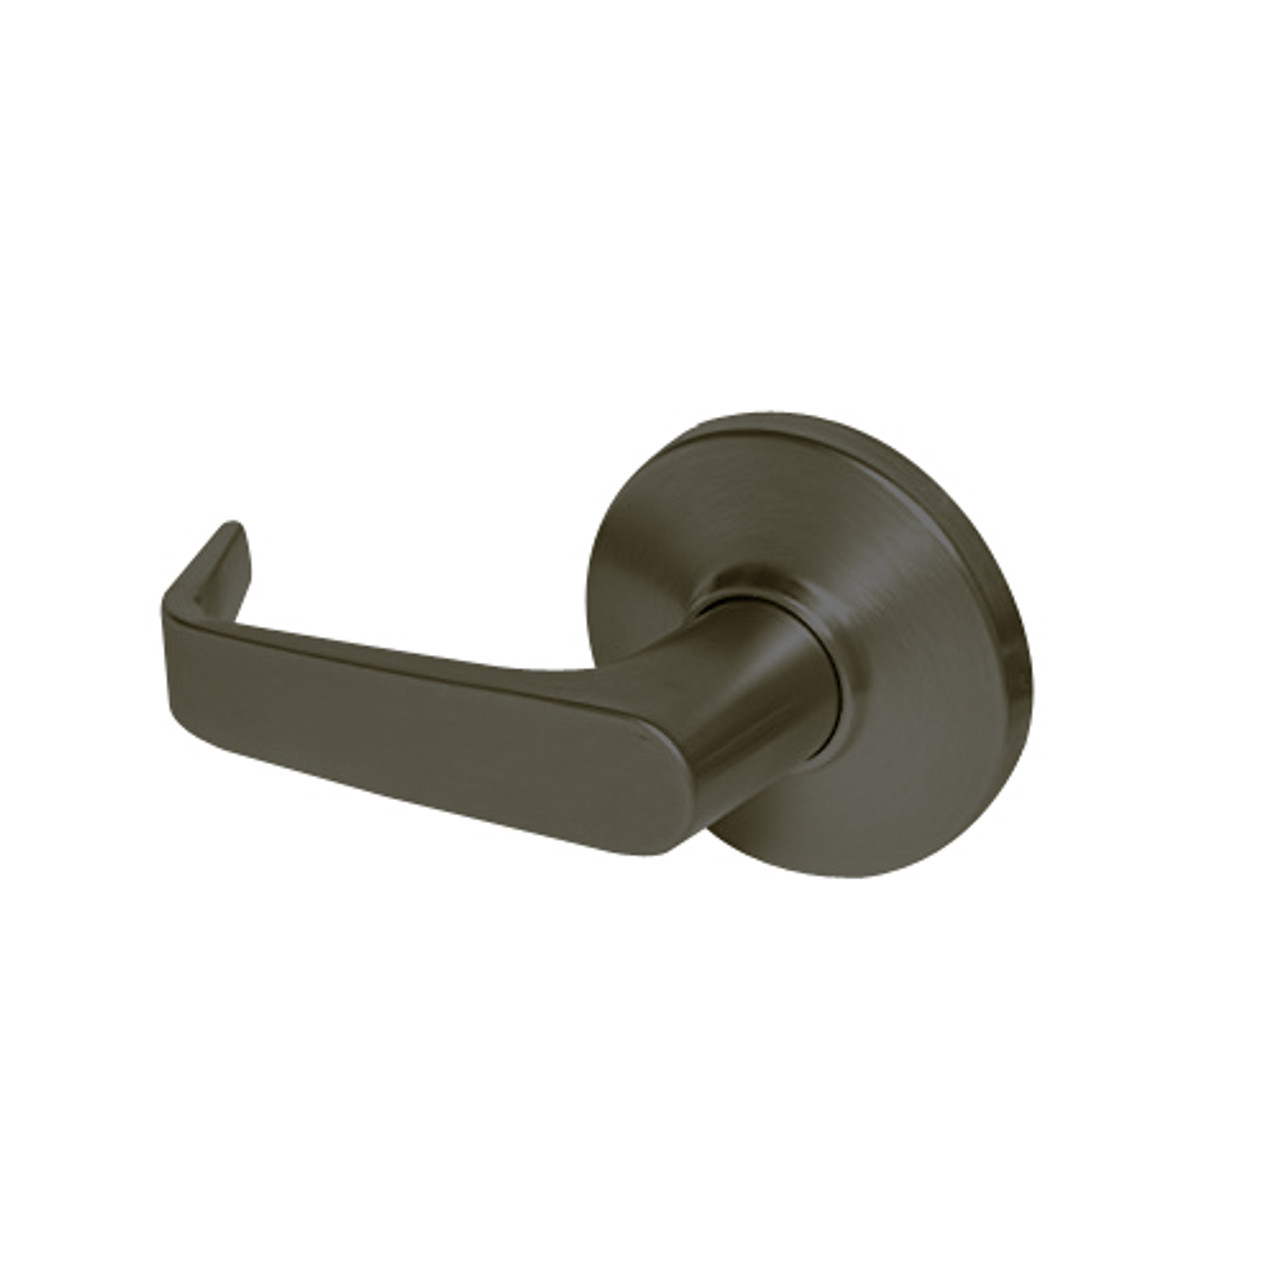 9K30P15DSTK613 Best 9K Series Patio Heavy Duty Cylindrical Lever Locks with Contour Angle with Return Lever Design in Oil Rubbed Bronze